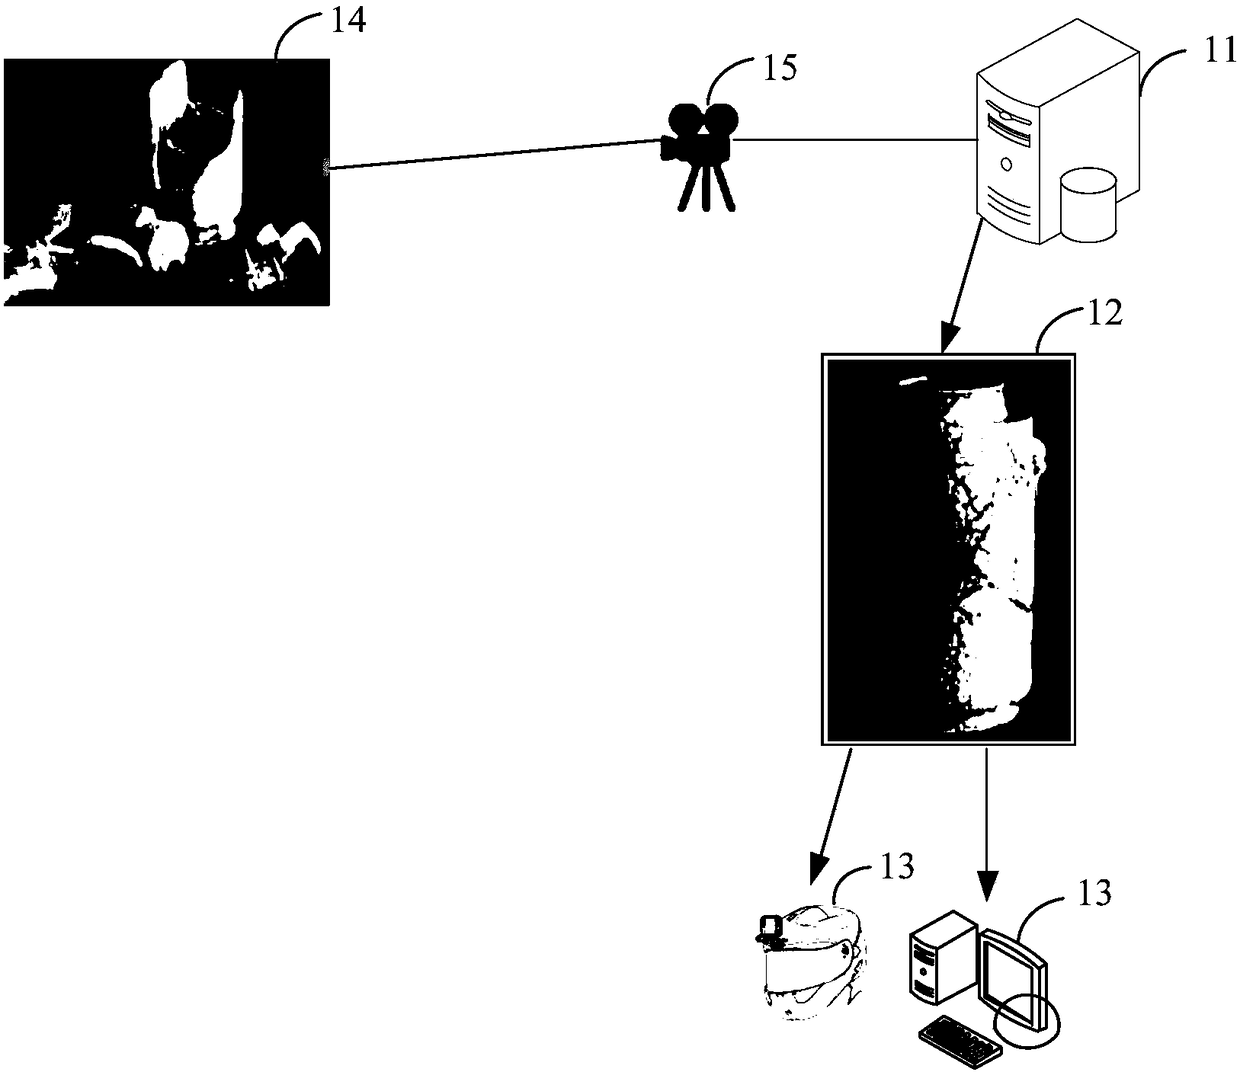 Method and system for displaying cultural relics based on augmented reality